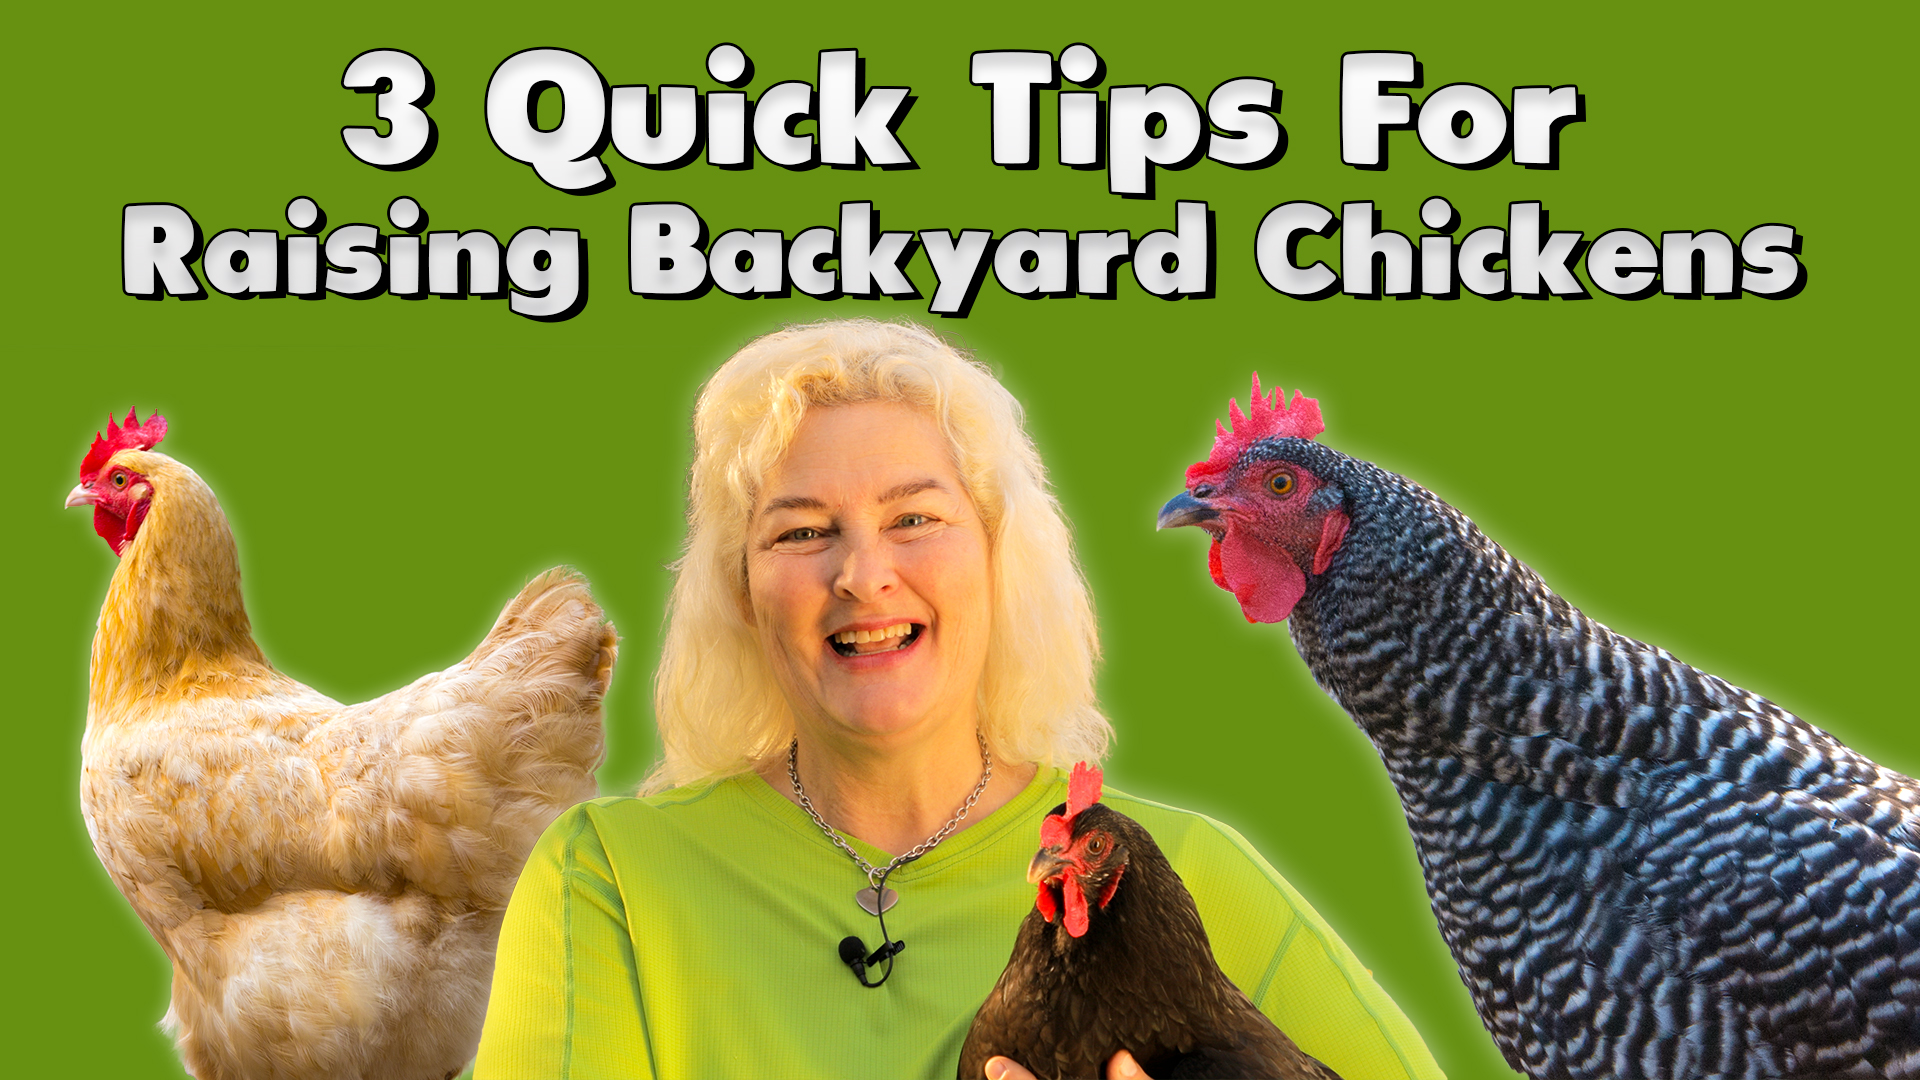 3 Quick Tips For Raising Backyard Chickens